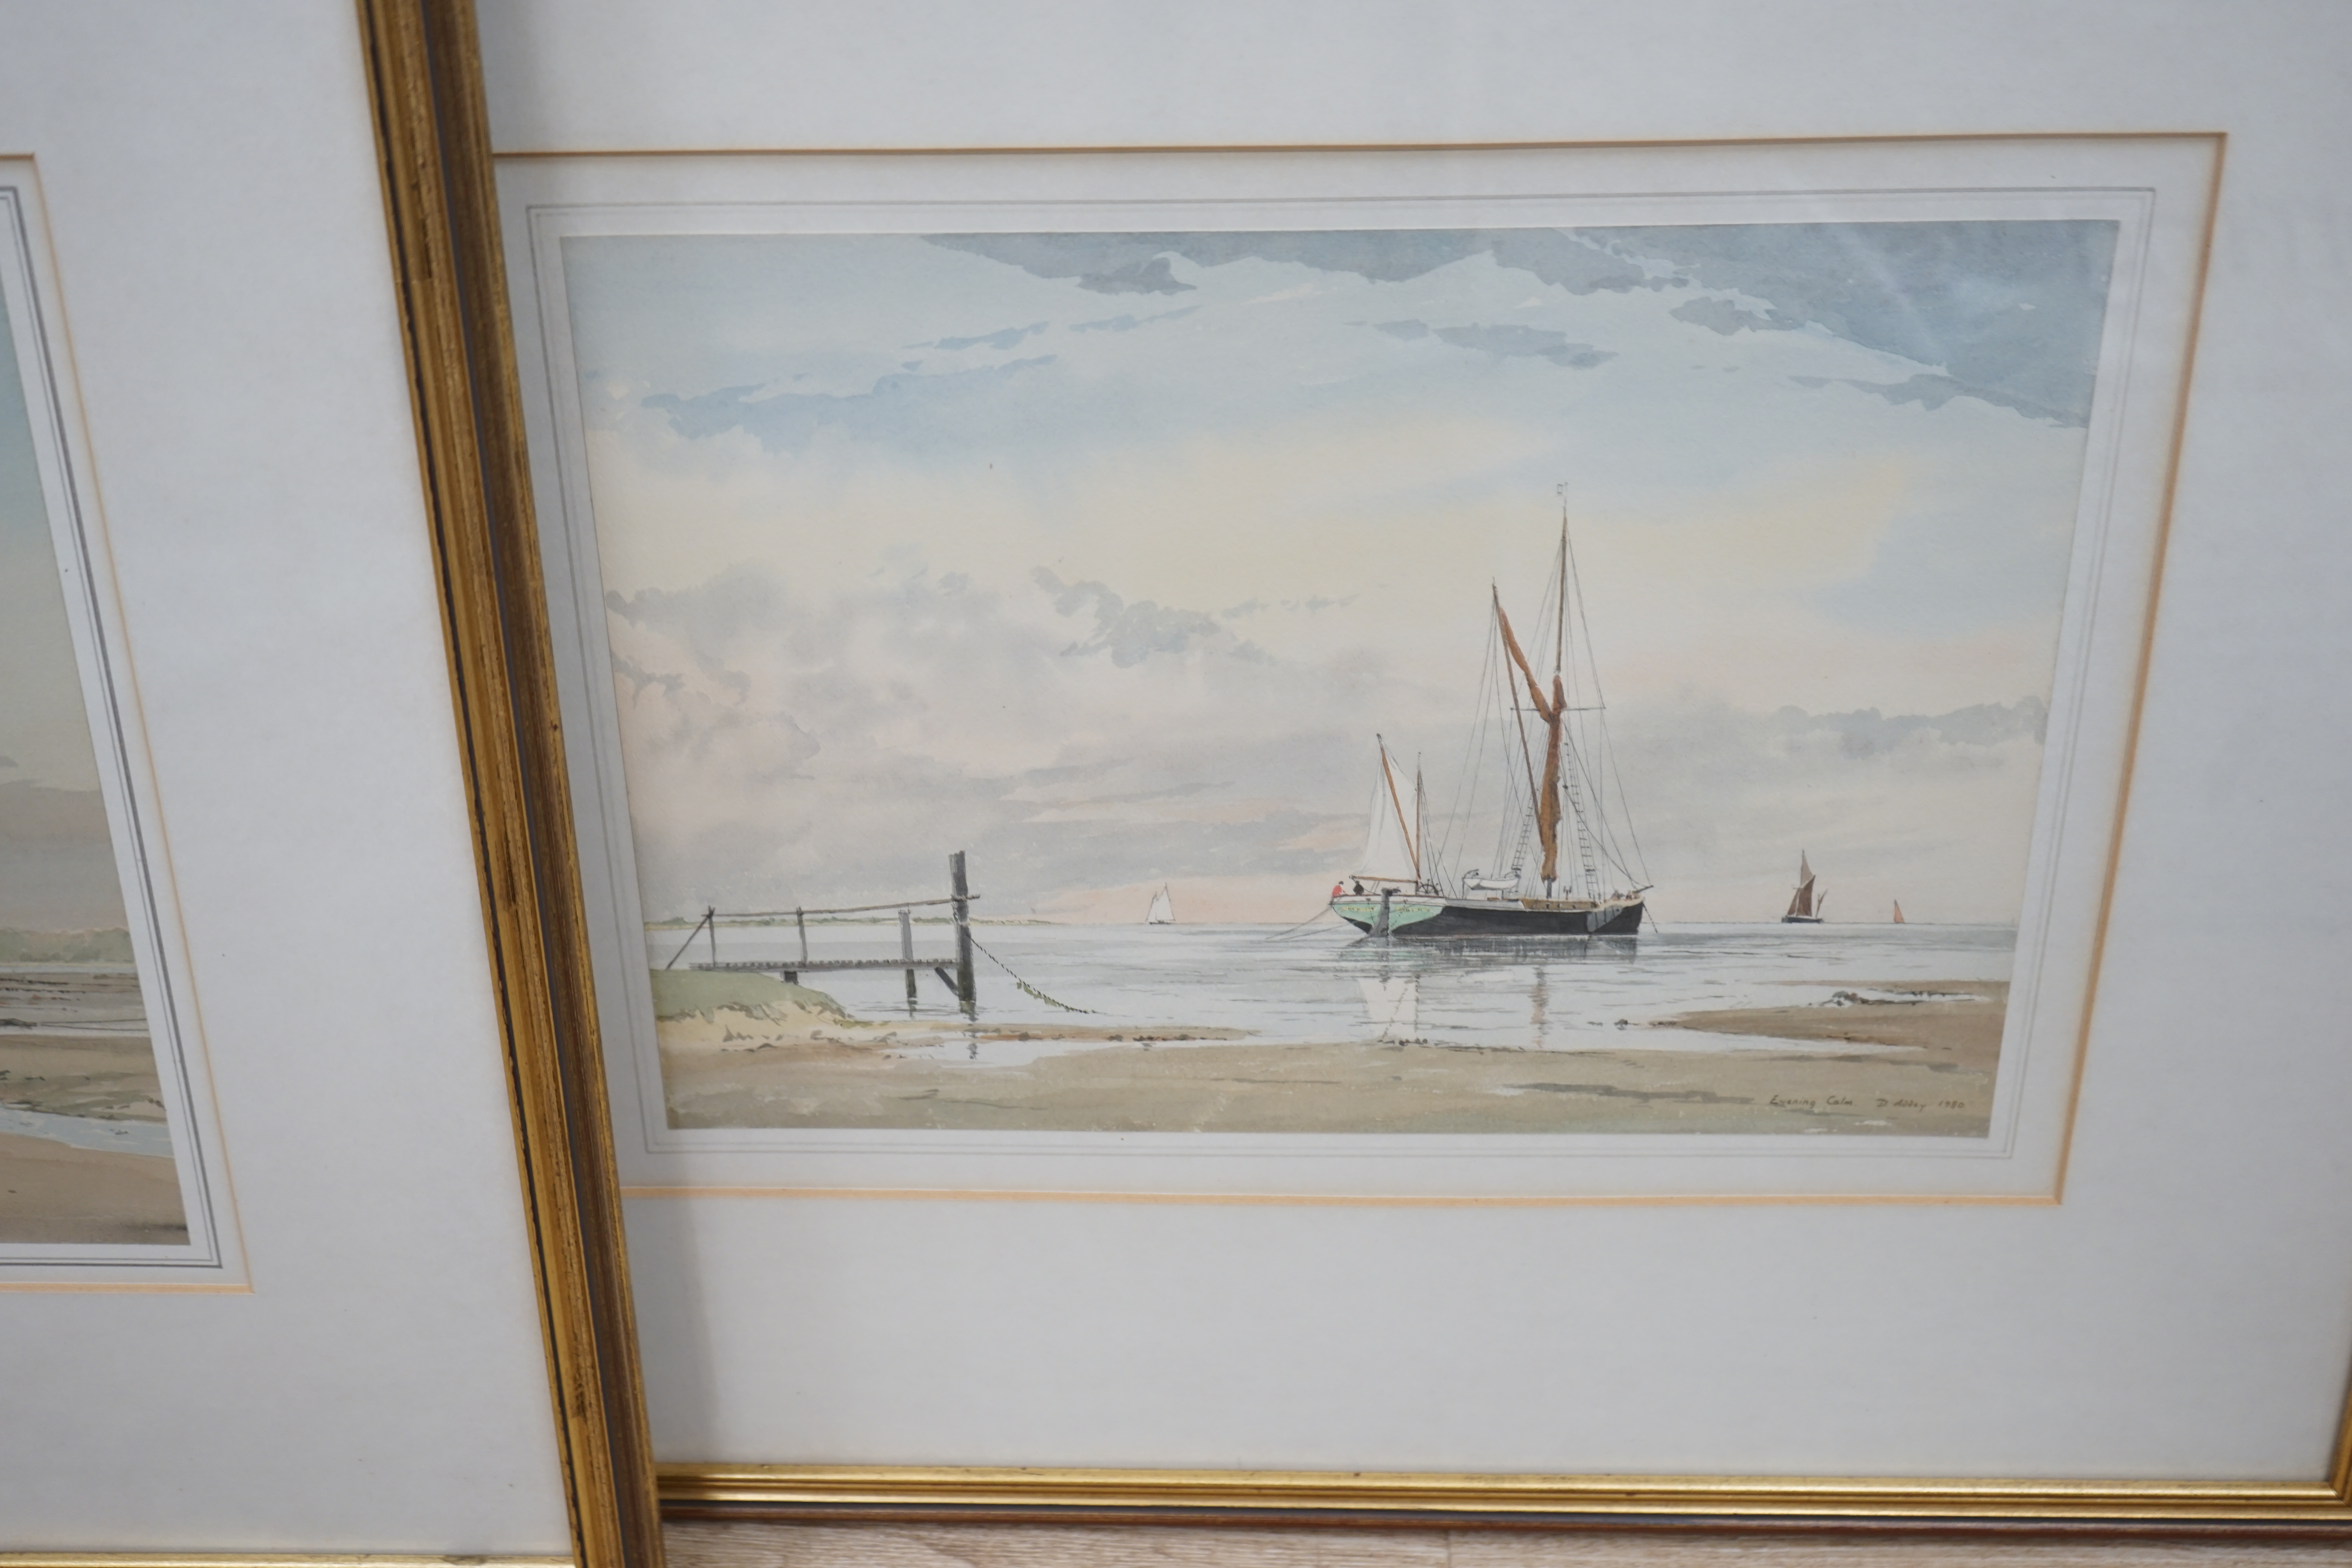 David Addey (b.1933), set of three watercolours, comprising 'Morning Mist, Rochester', 'Evening Calm' and 'On the Hard Pin Mill', each signed, labels verso, largest 27 x 45cm. Condition - fair